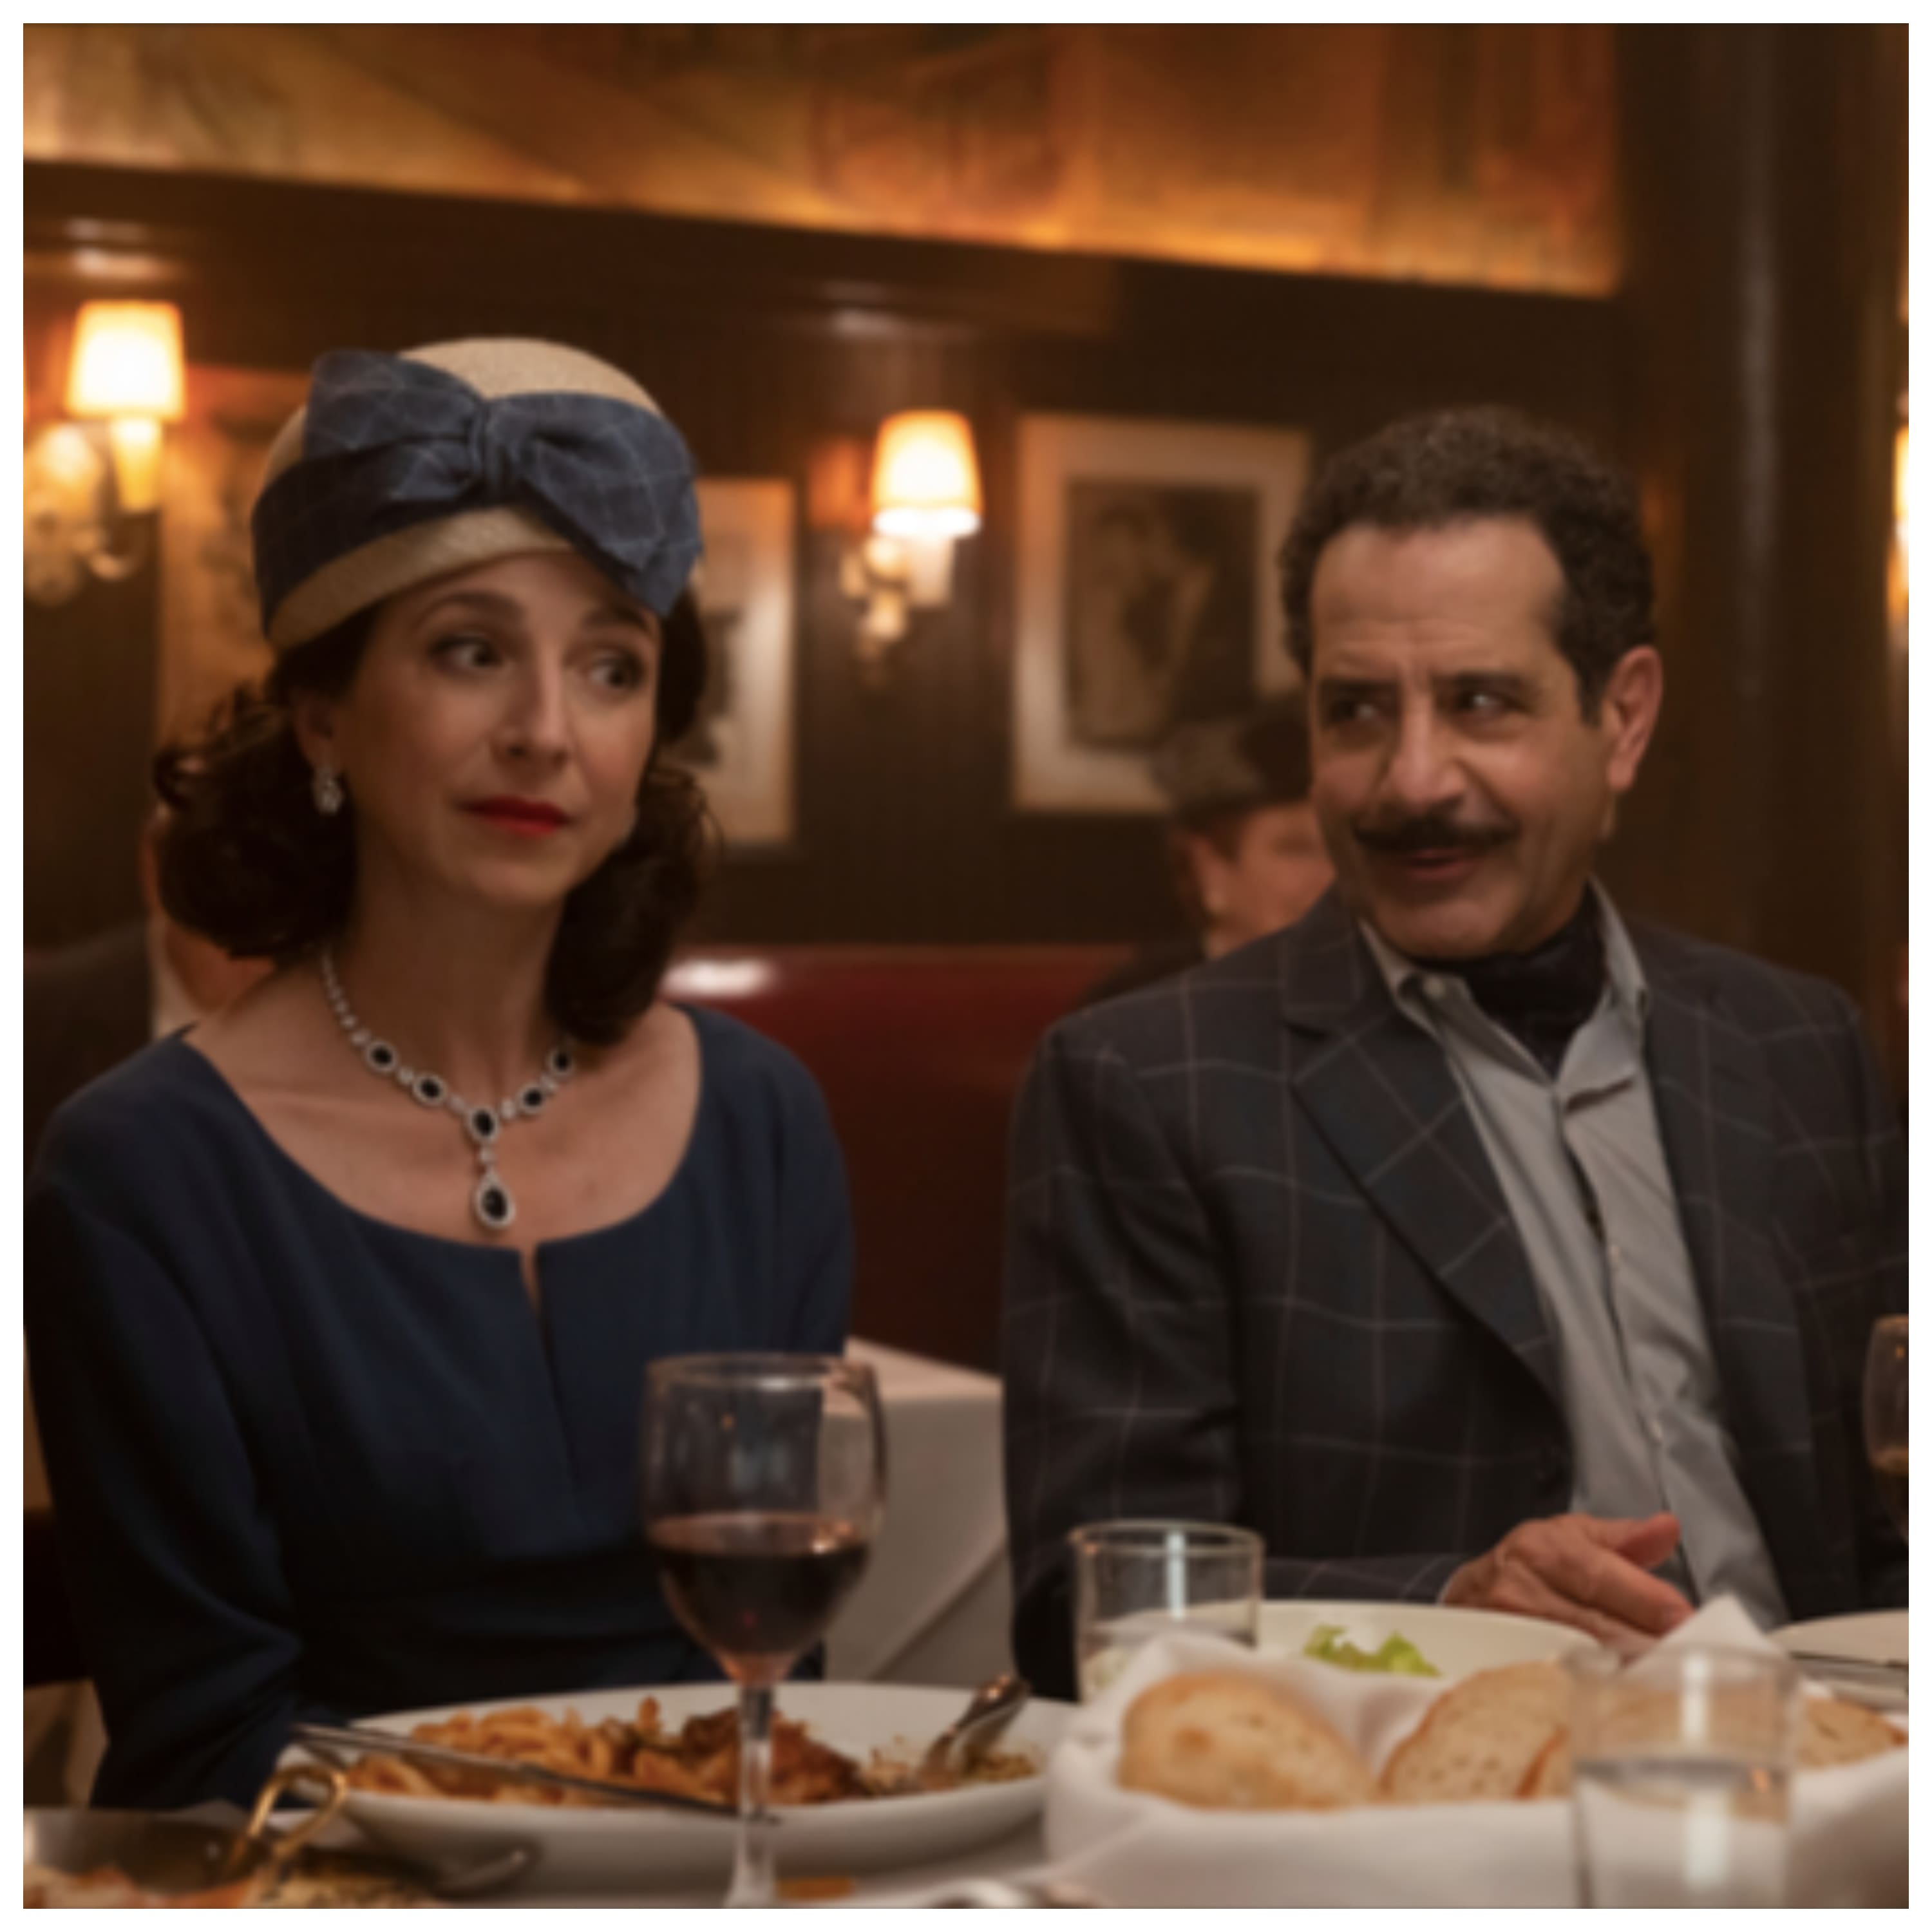 Marin Hinkle and Tony Shalhoub dine next to each other on 'The Marvelous Mrs. Maisel'